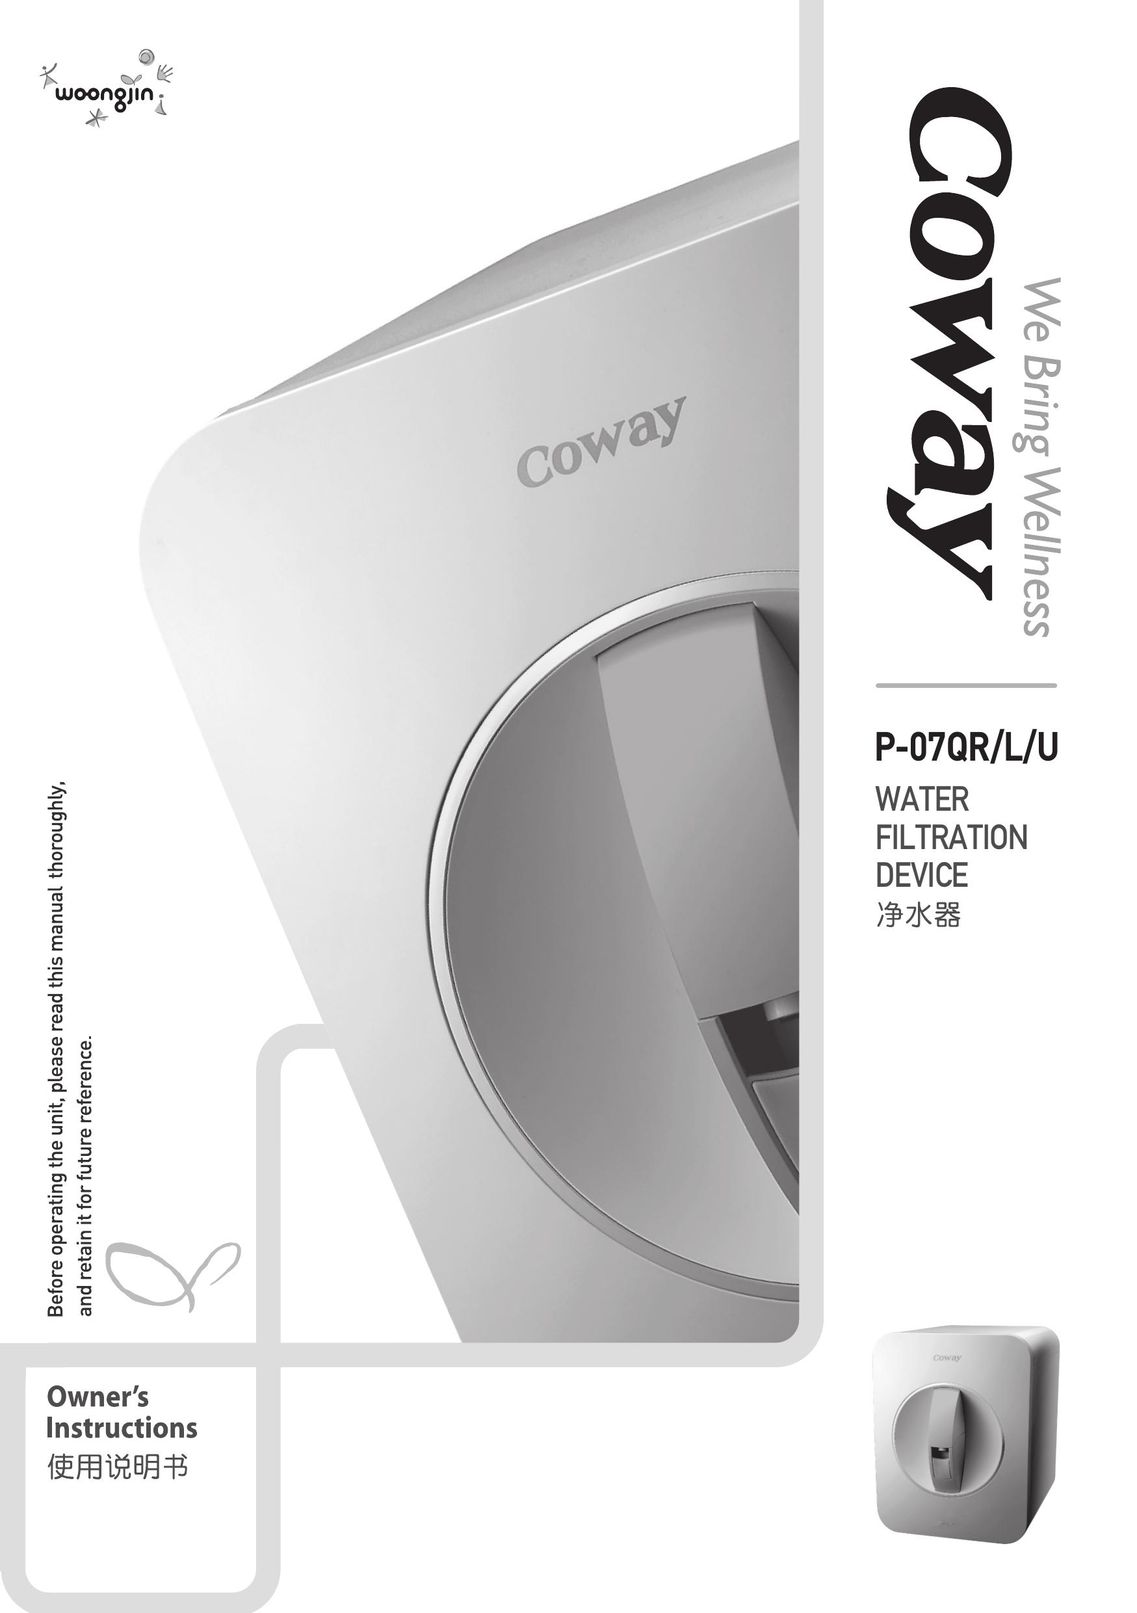 Coway P-07QU Water System User Manual